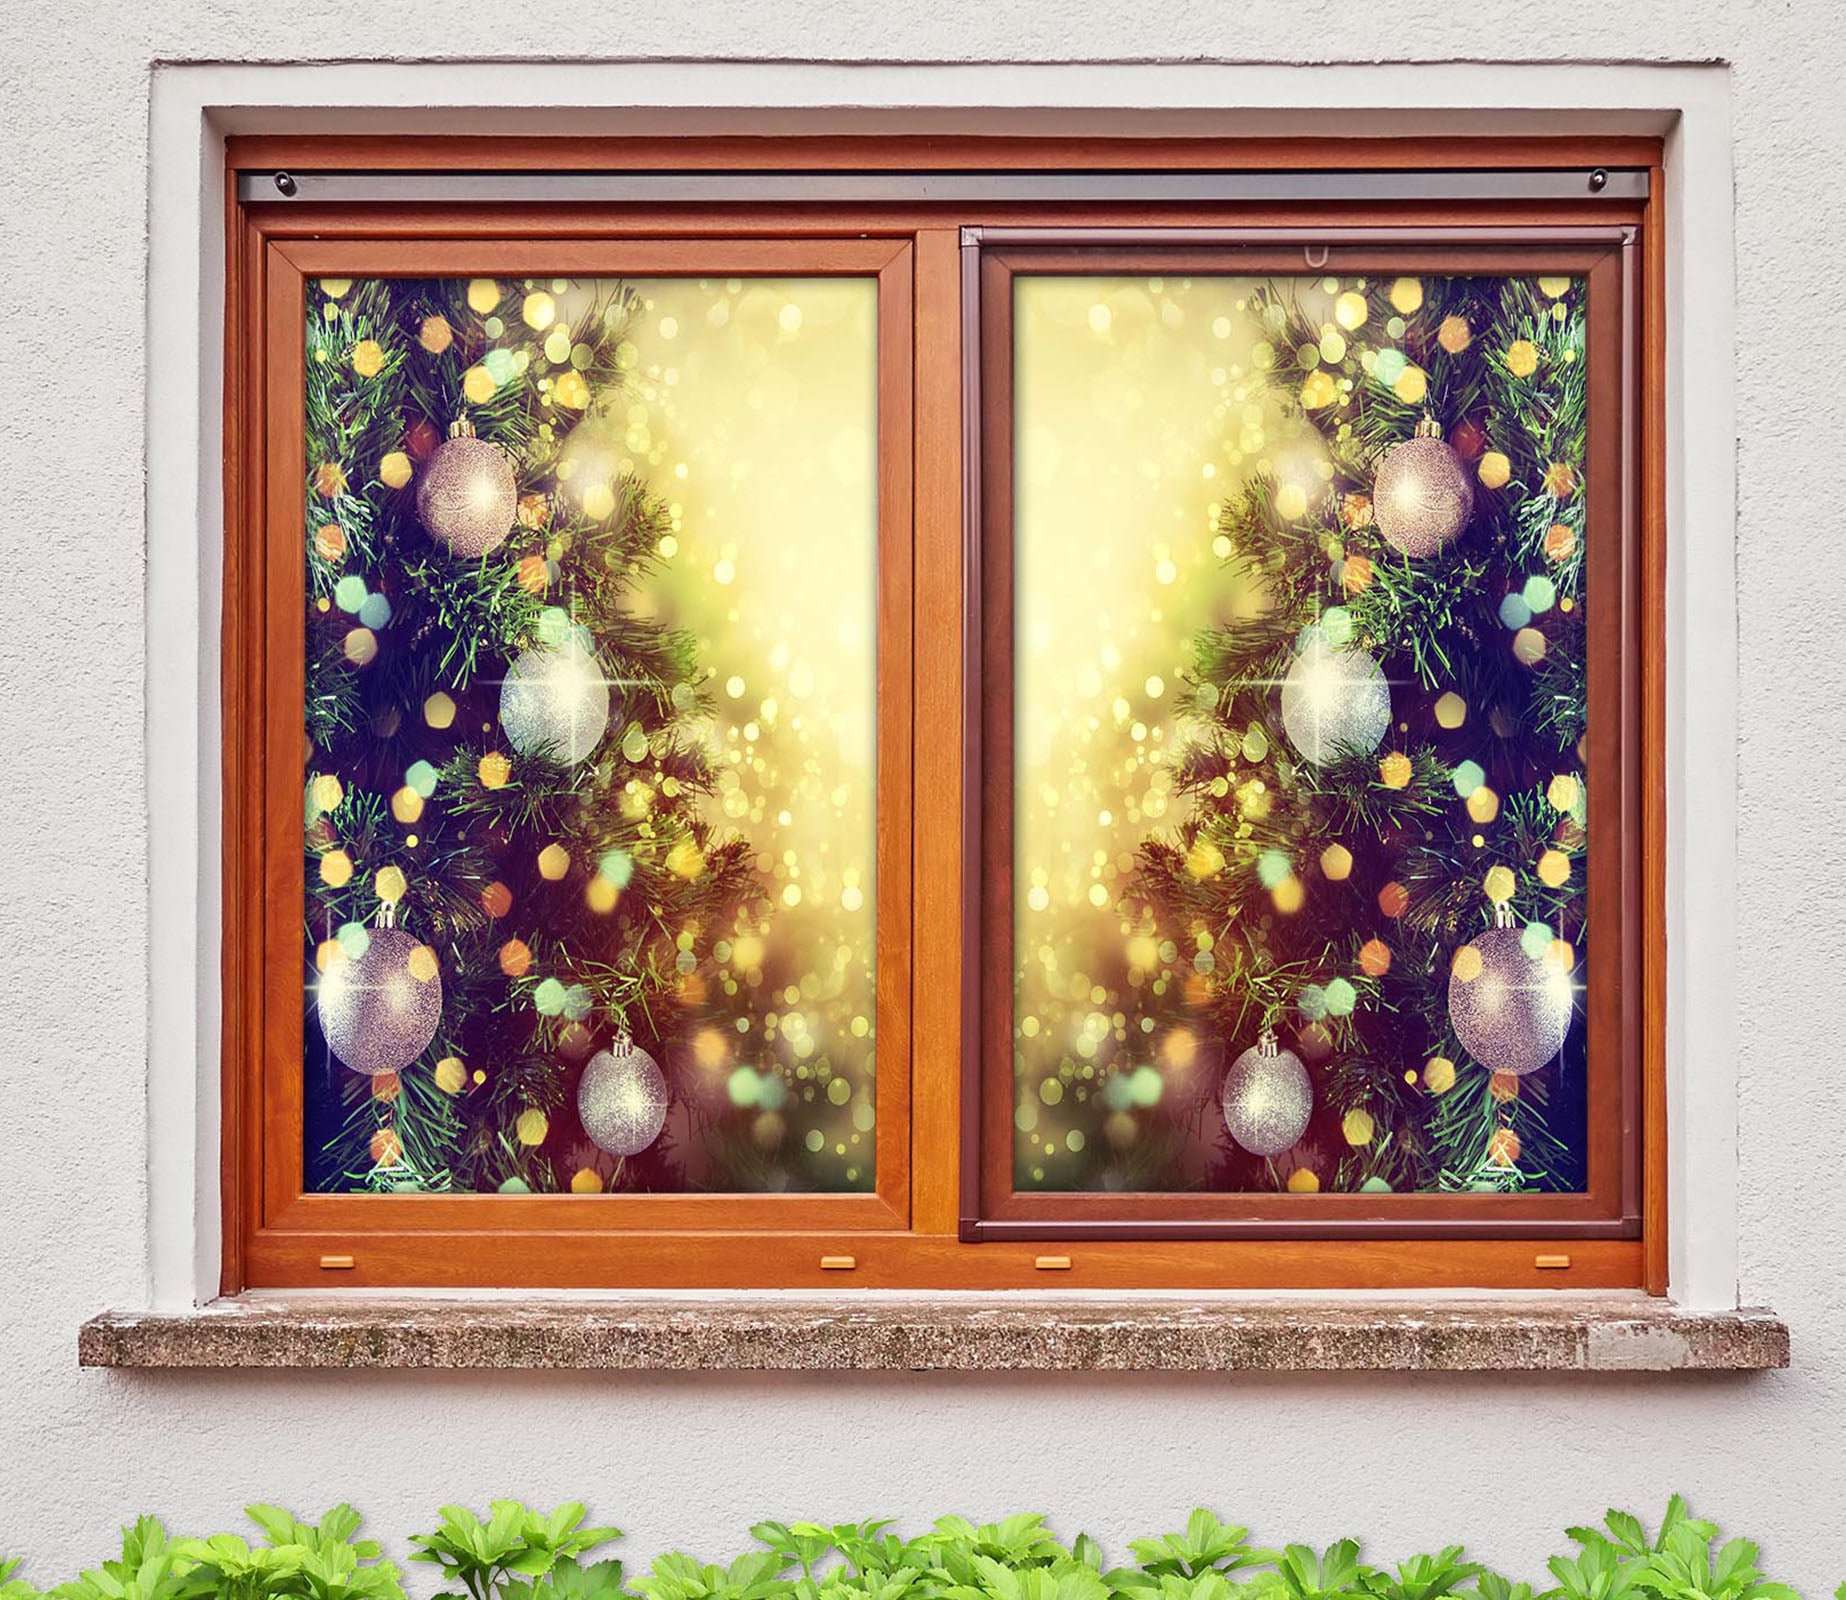 3D Christmas Tree White Balls 30107 Christmas Window Film Print Sticker Cling Stained Glass Xmas